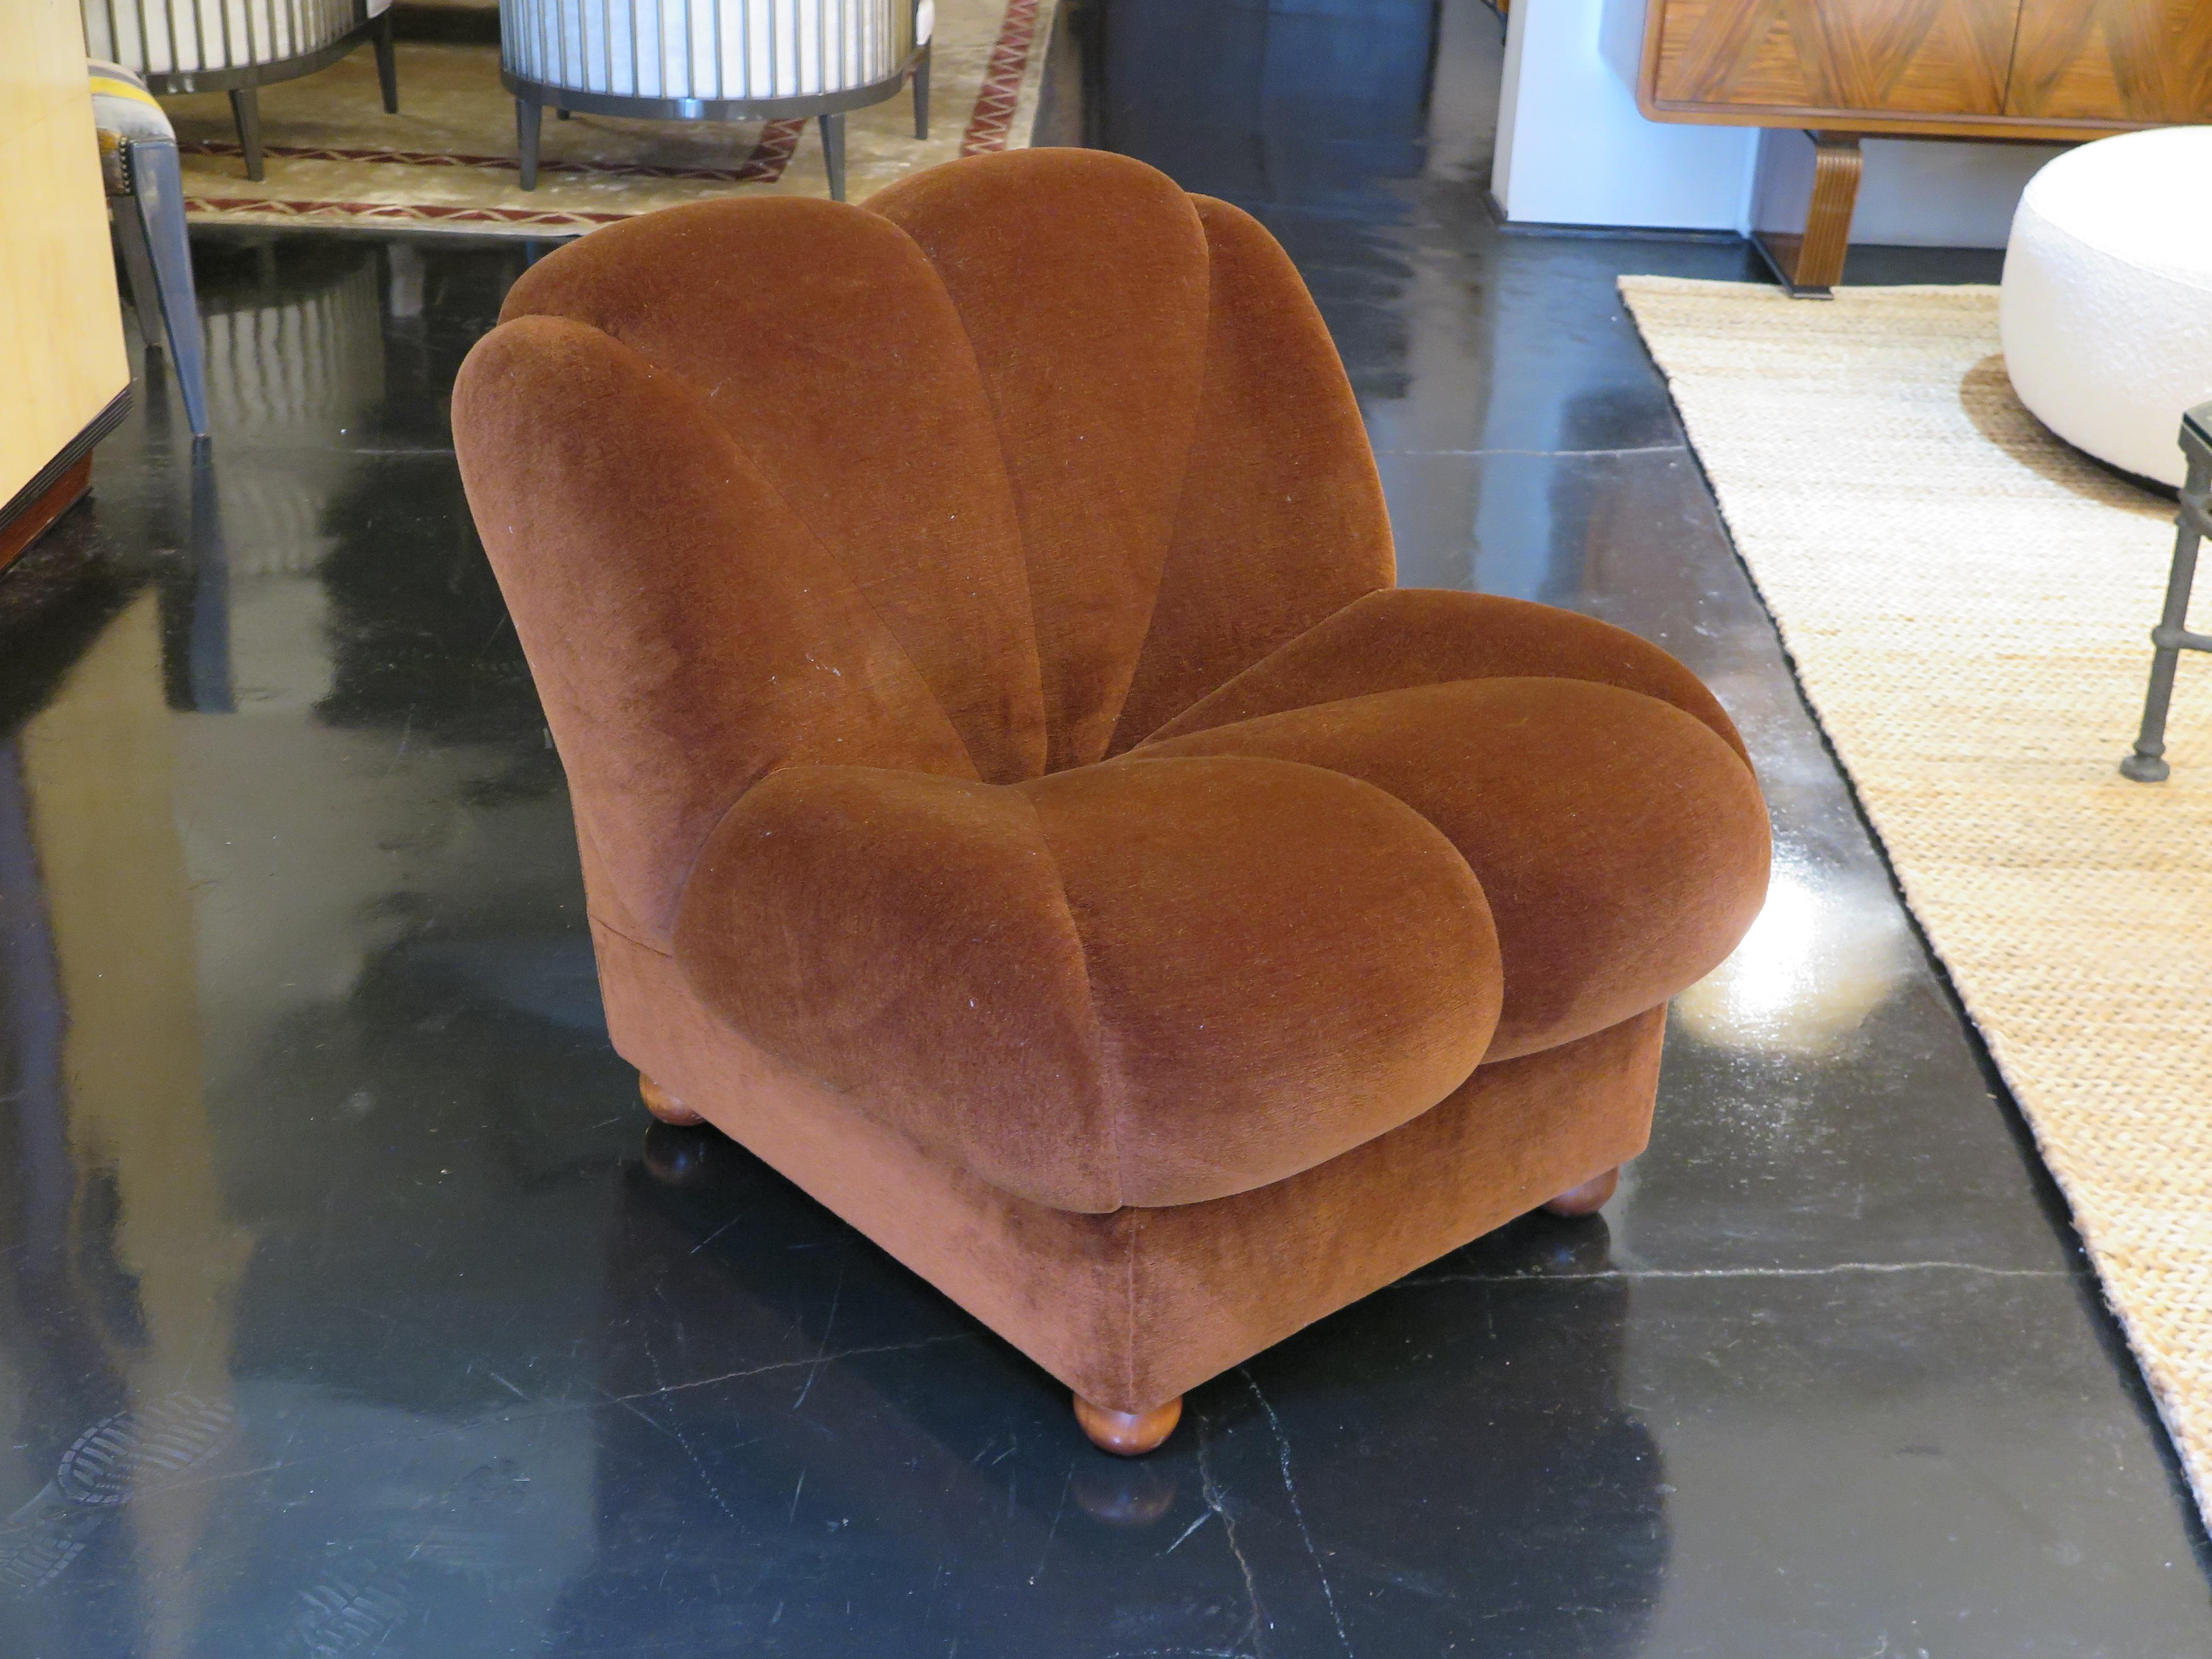 Single mid-century slipper chair with scallop edges forming a clamshell design. The chair is shown in its original brown velvet upholstery (still good condition) and houses four wooden ball feet.  This is sold as a single lounge chair.  